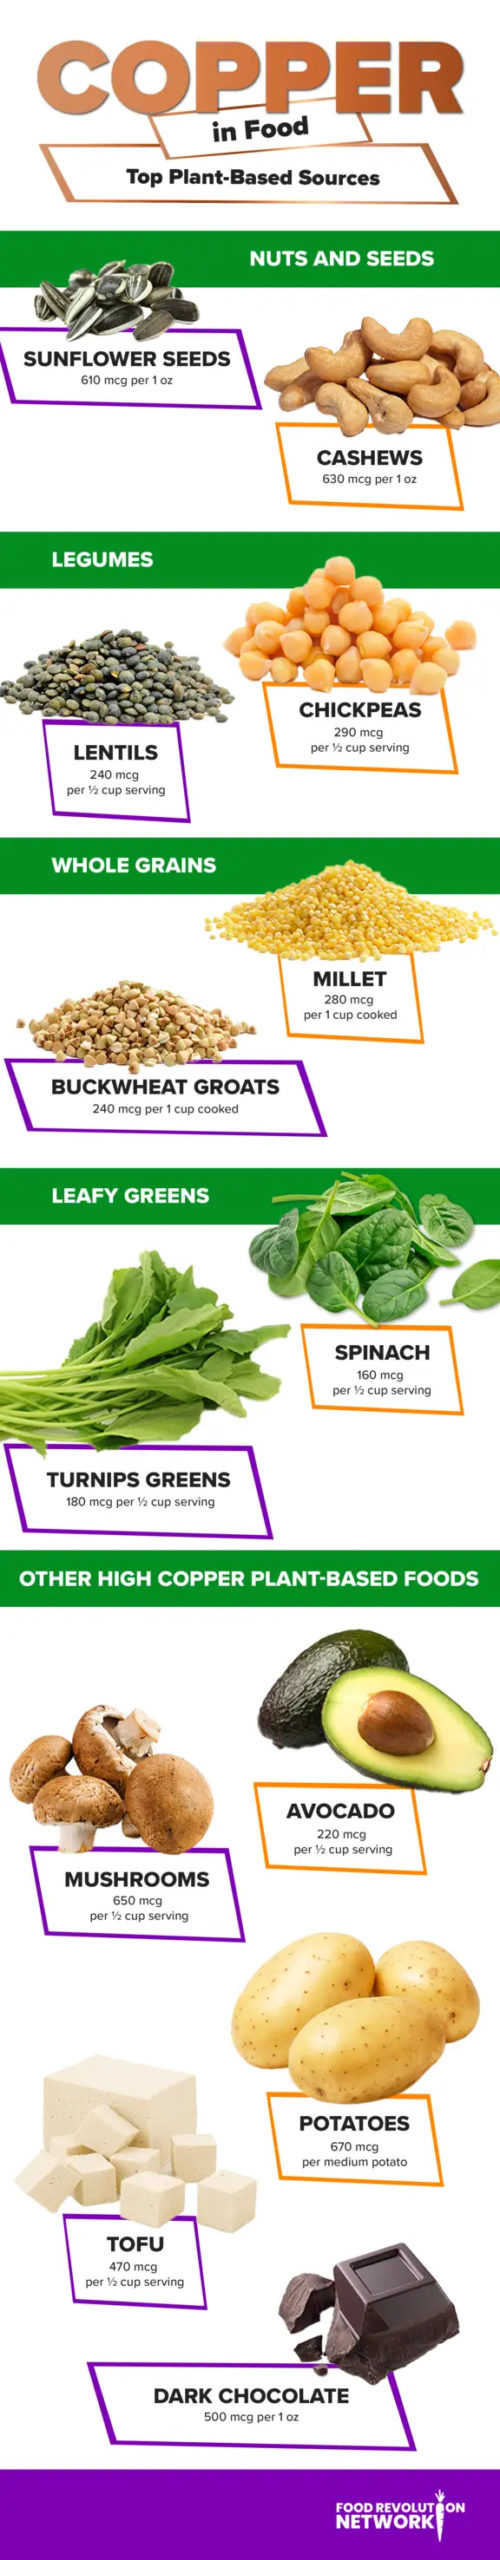 Dietary copper sources - copper in food infographic